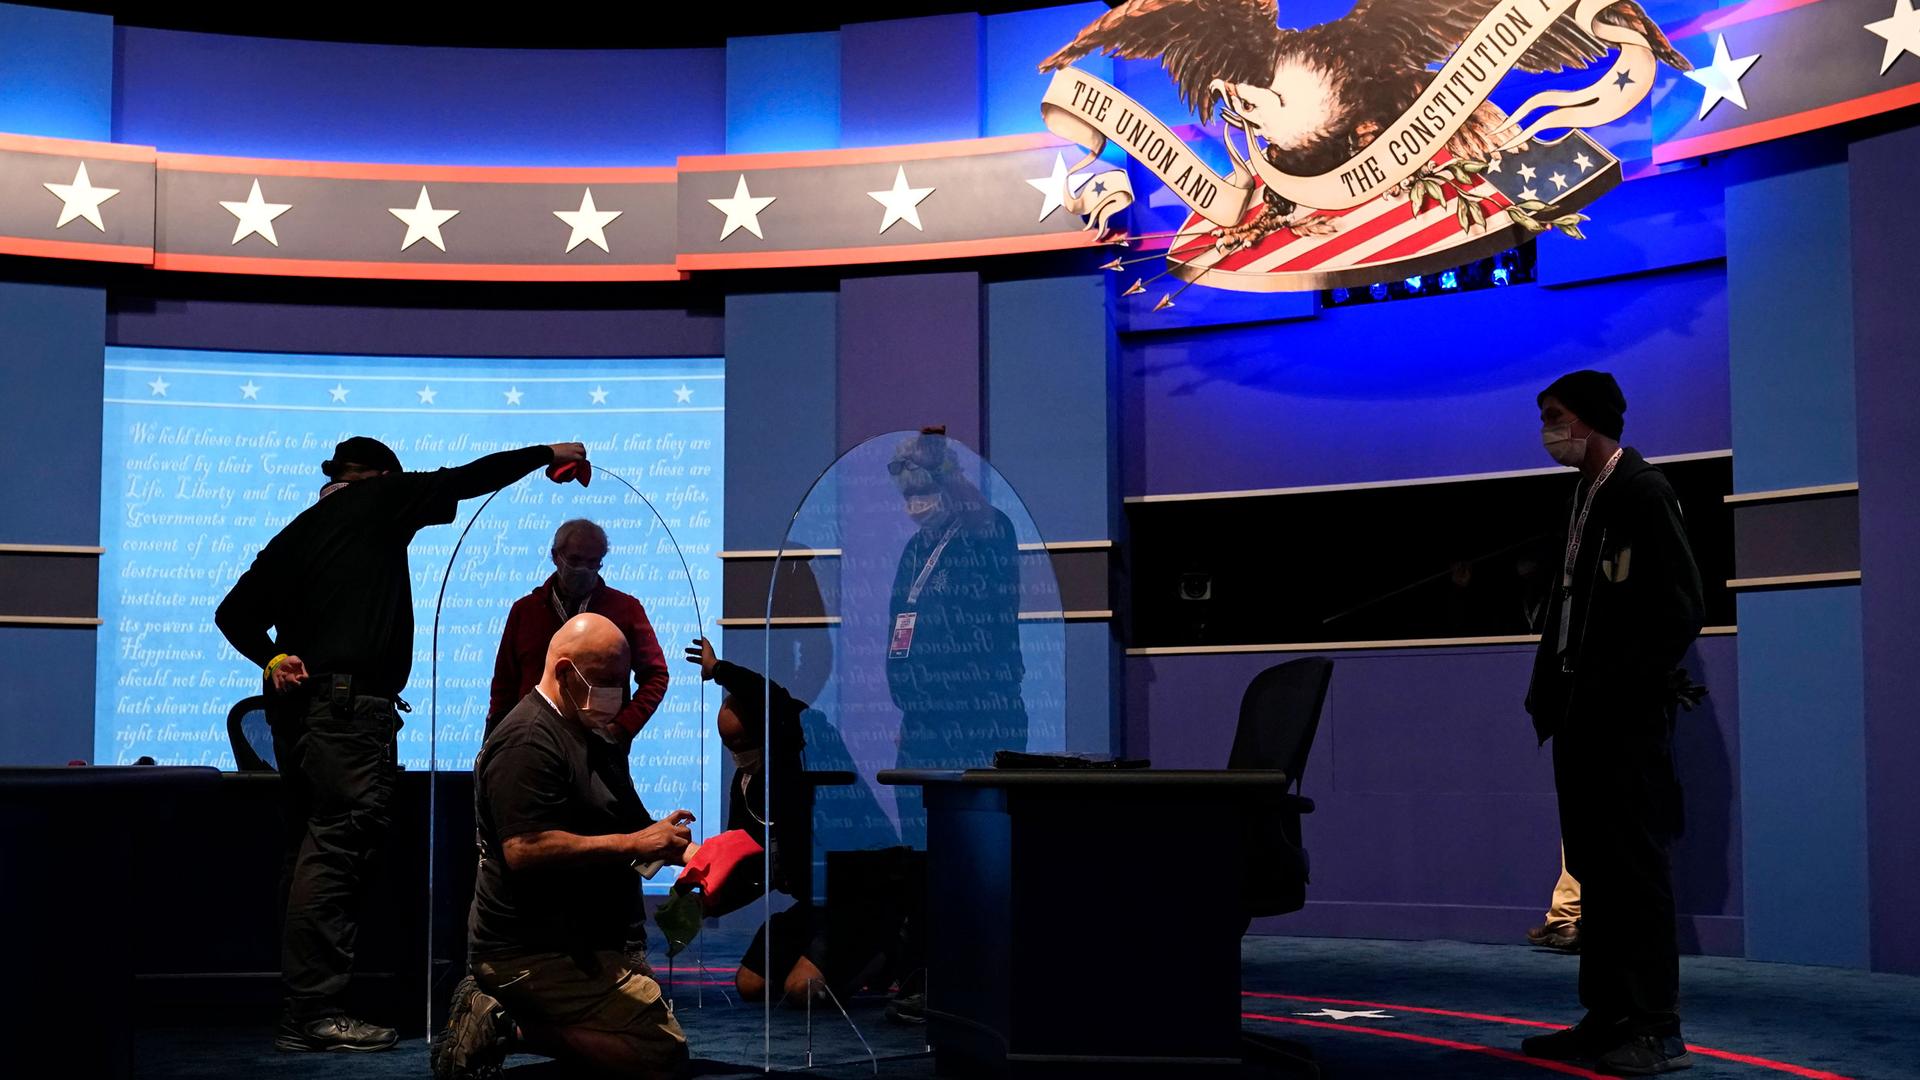 Workers clean protective plastic panels onstage between tables for Mike Pence and Kamala Harris with a large backdrop that includes stars across it.